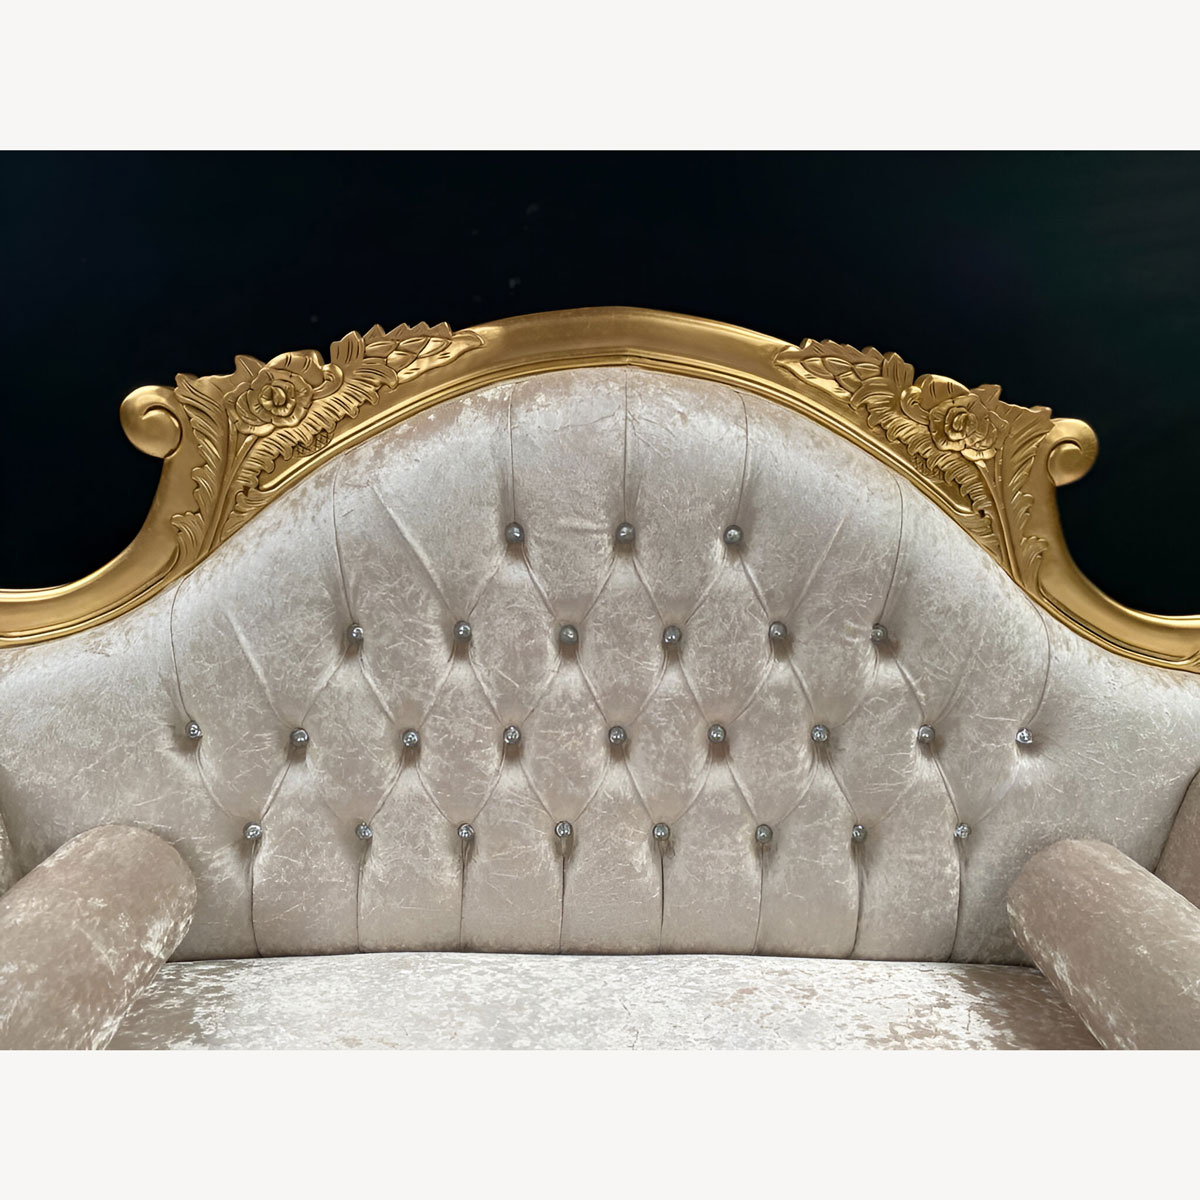 Charles Louis Cuddler Love Seat Chaise Sofa In Gold Leaf Frame Upholstered In Ivory Cream Crushed Velvet With Crystal Buttoning 2 - Hampshire Barn Interiors - Charles Louis Cuddler Love Seat Chaise Sofa In Gold Leaf Frame Upholstered In Ivory Cream Crushed Velvet With Crystal Buttoning -